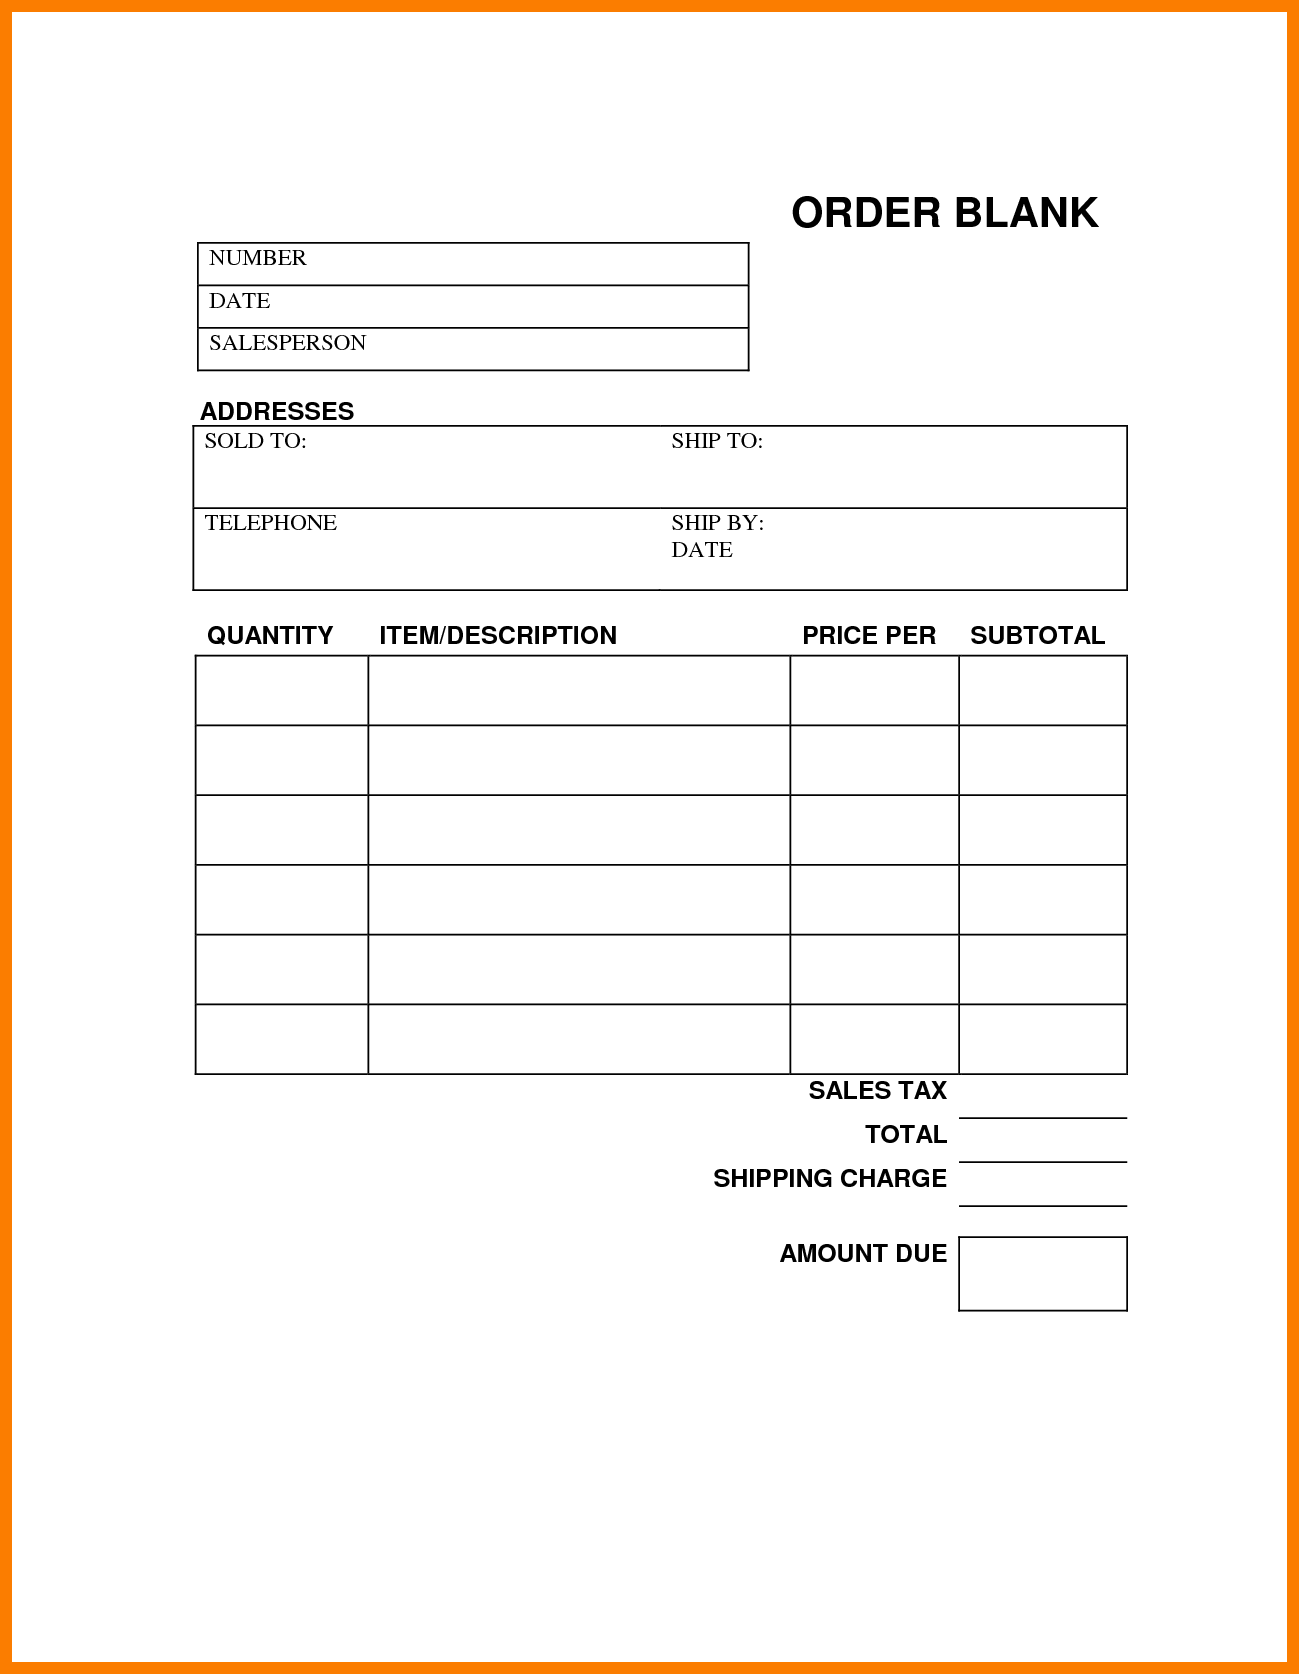 custom-order-form-printable-template-small-business-etsy-order-form